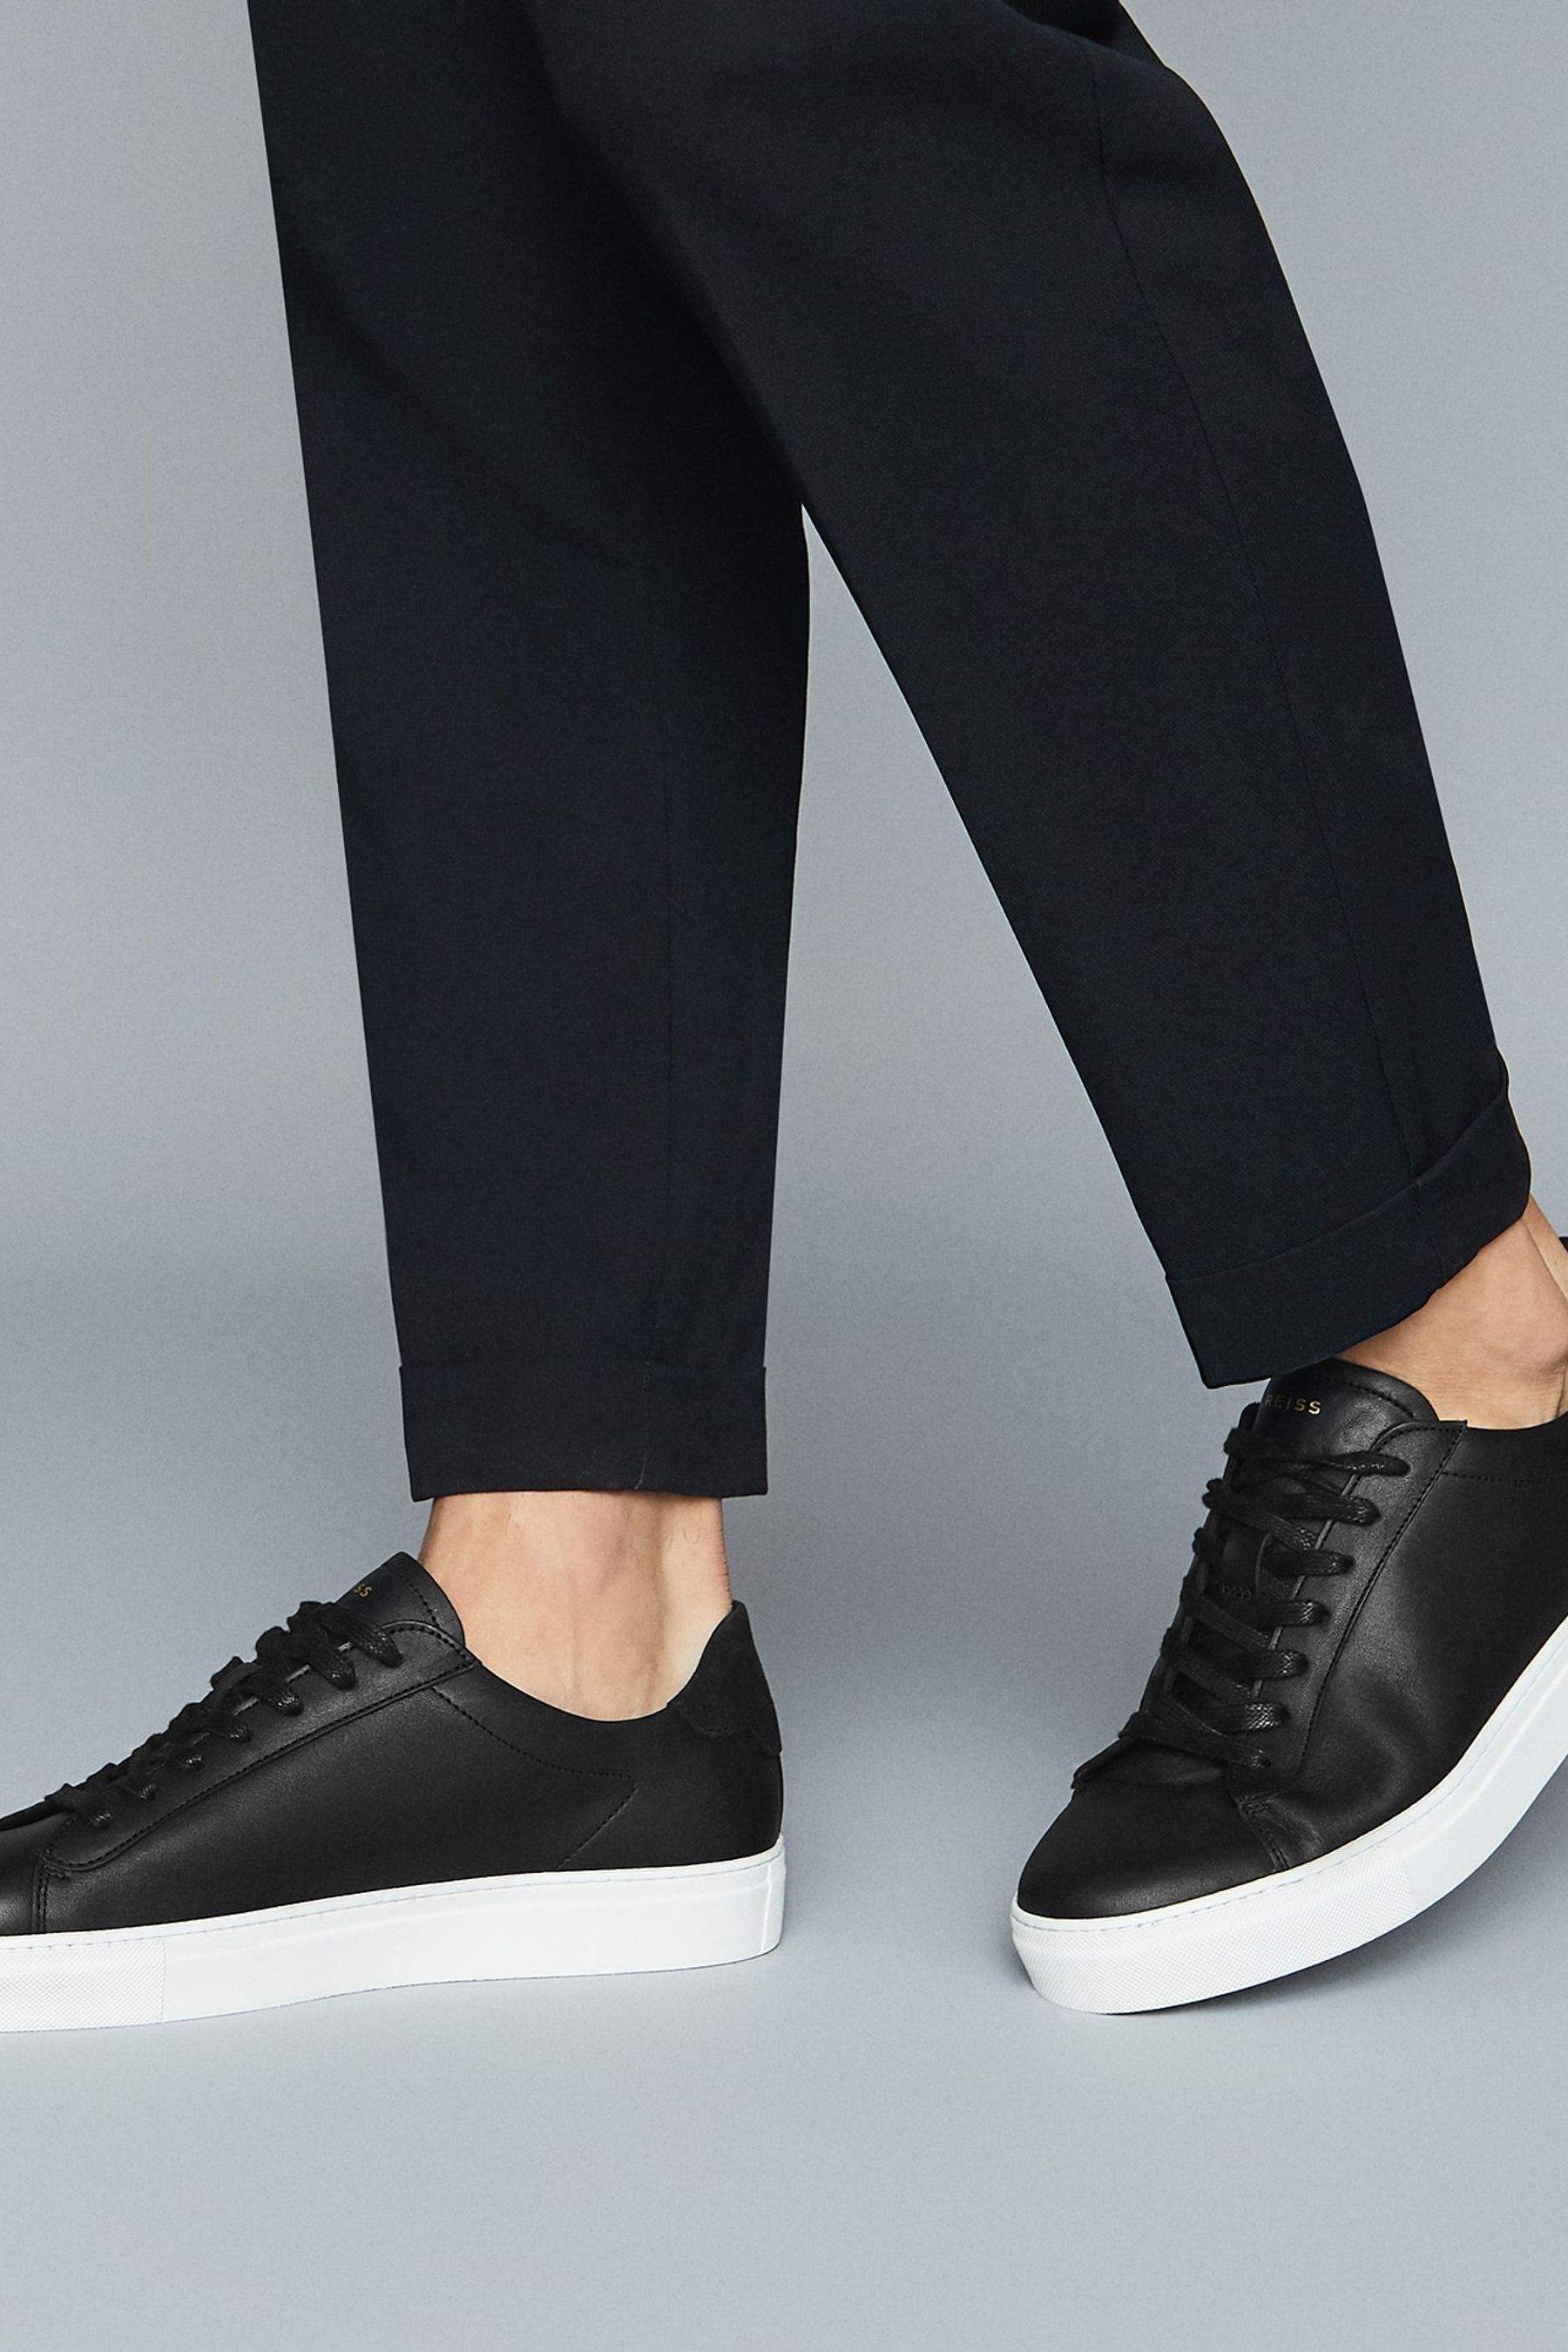 Buy Reiss Finley Leather Trainers from the Next UK online shop